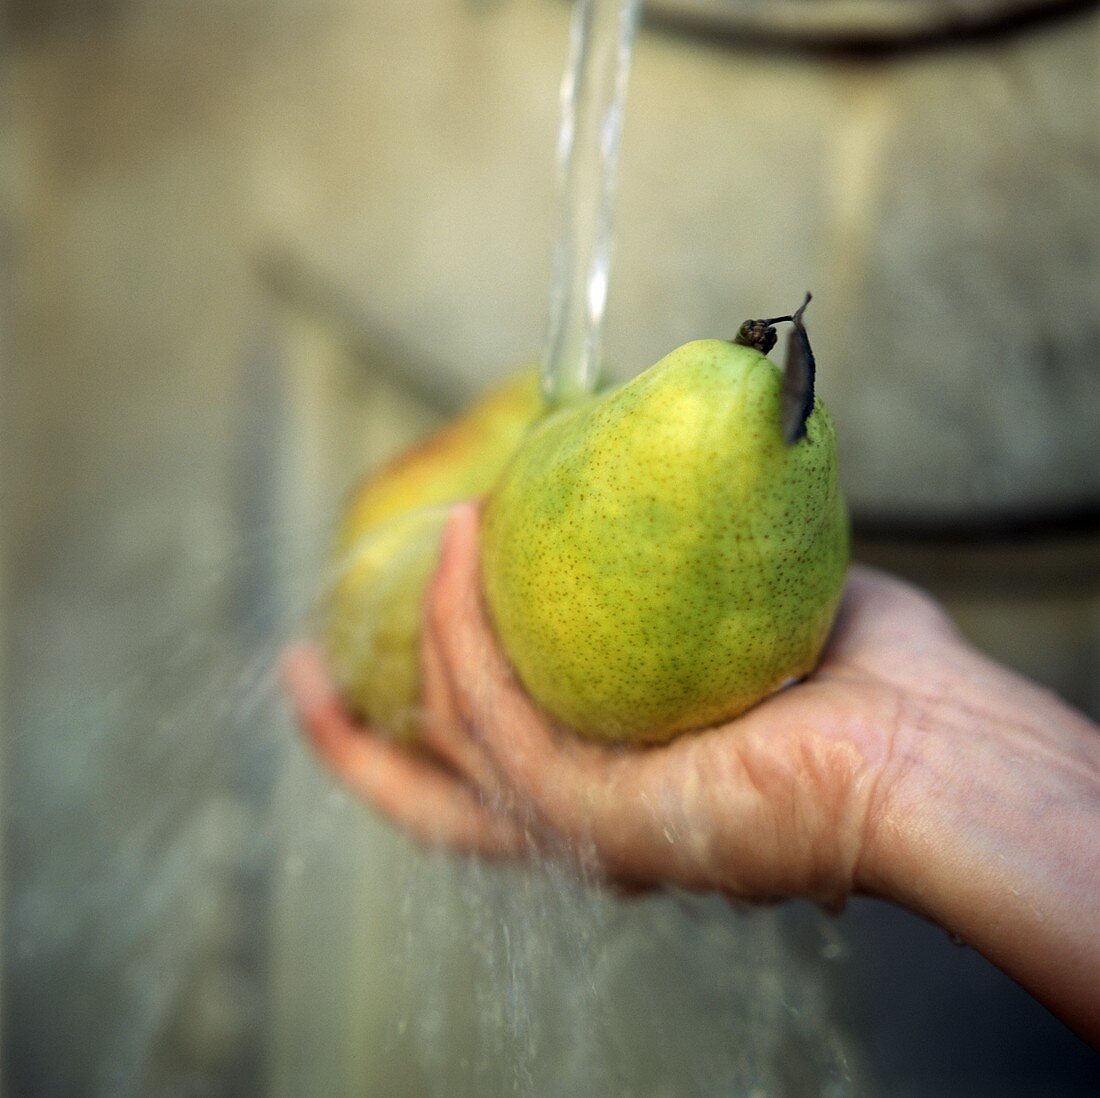 Hands holding two pears under running water